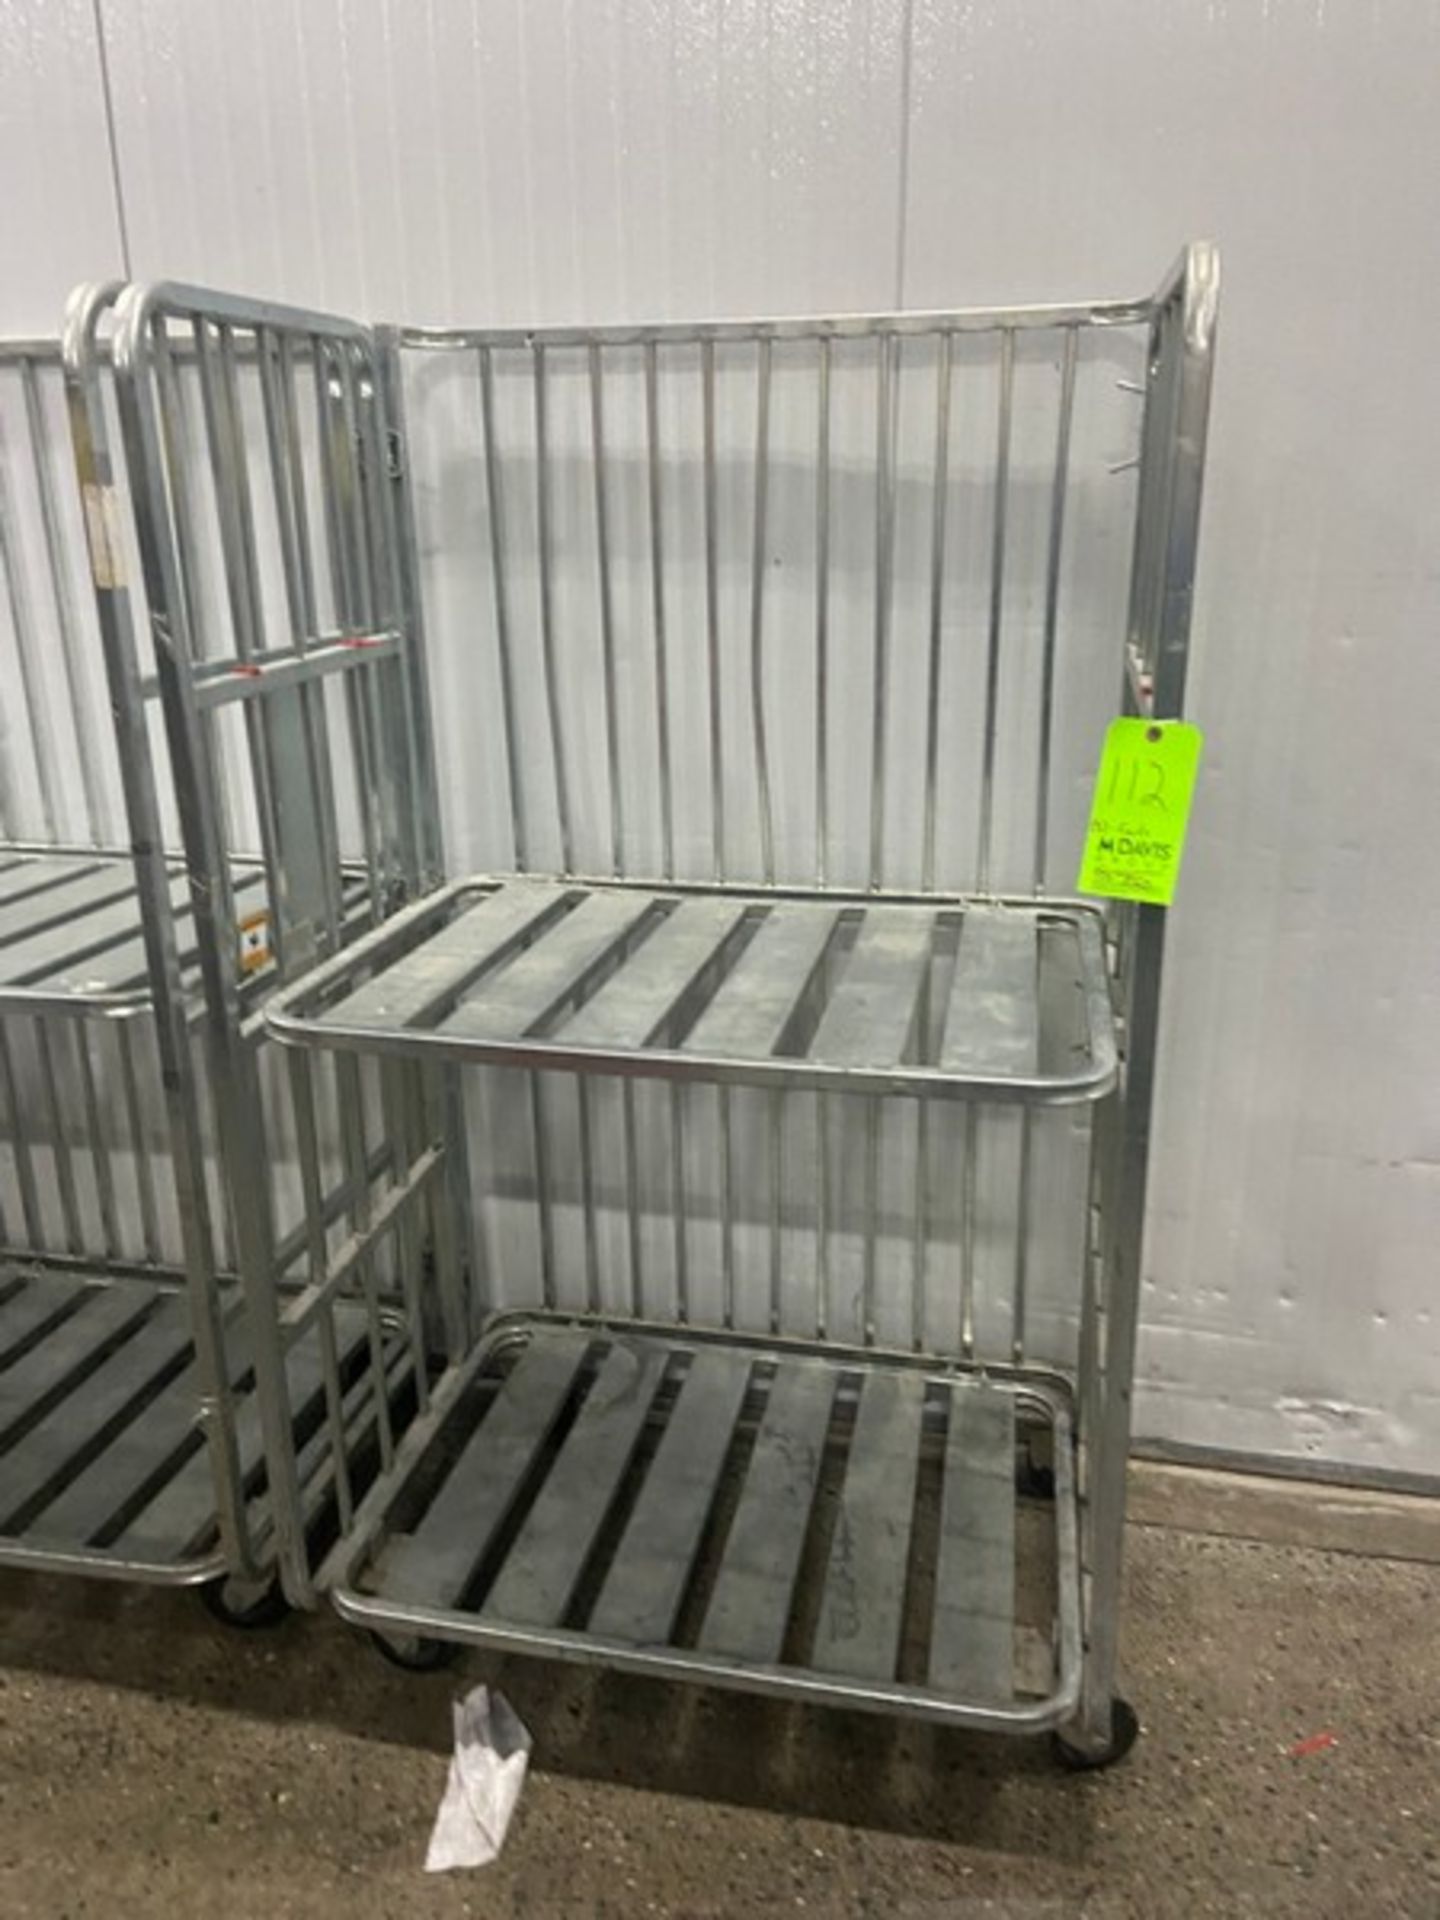 (3) Aluminum 2-Level Cage Carts, Overall Dims.: Aprox. 39" L x 29" W x 68-1/2" H (LOCATED IN RED - Image 3 of 3